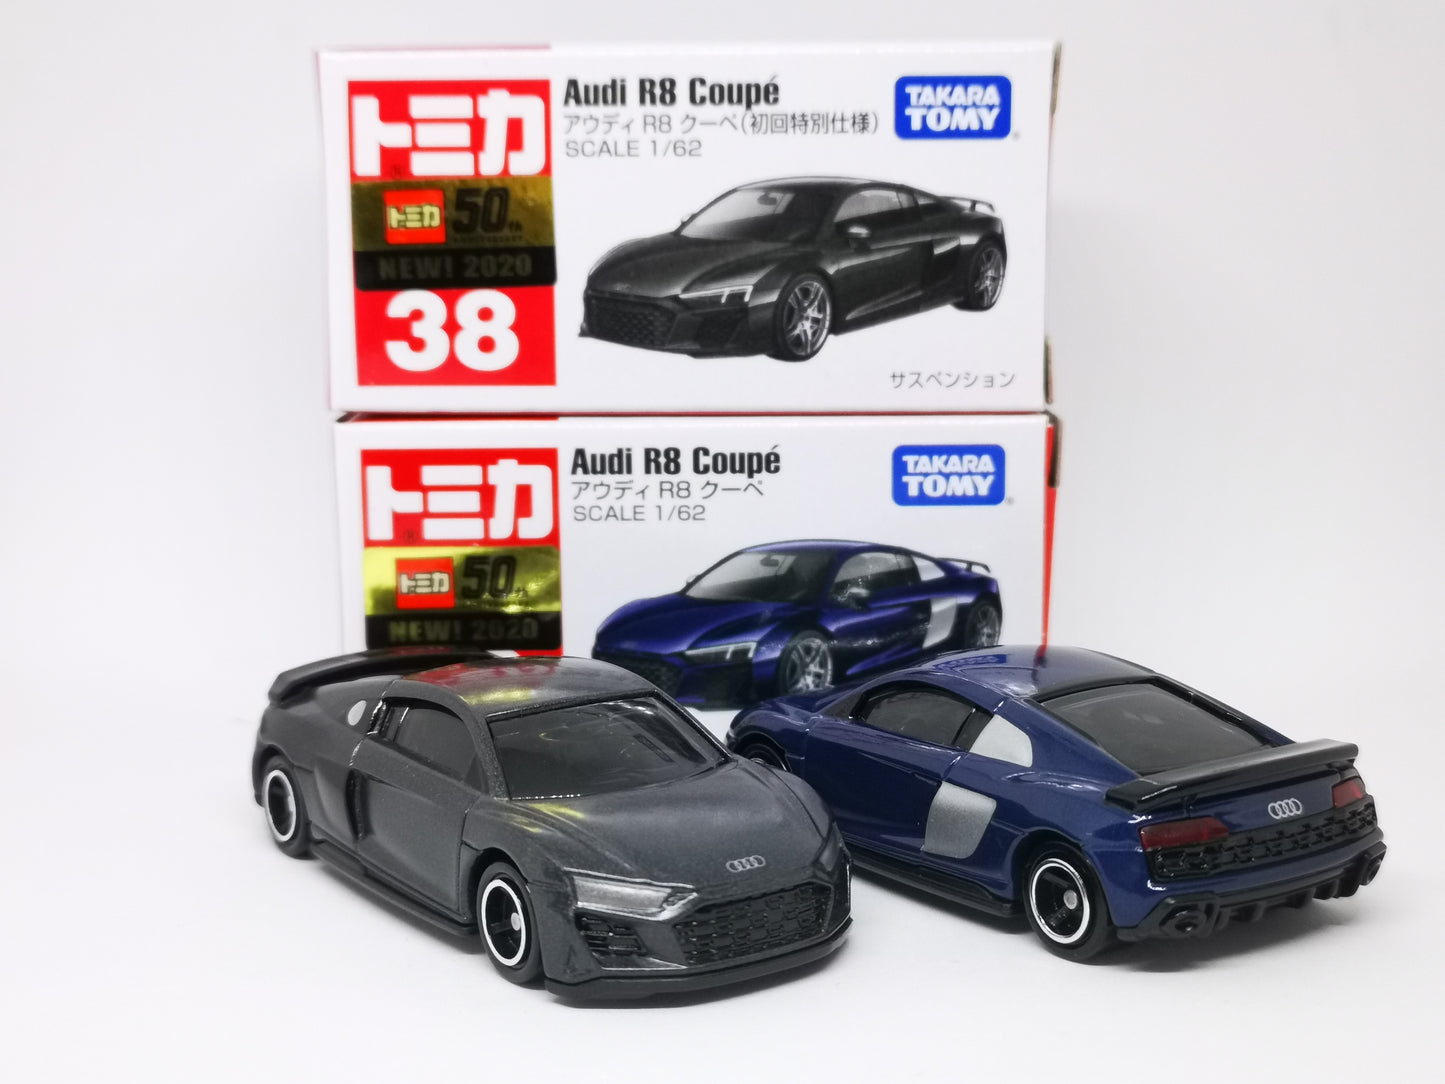 Tomica No.38 Audi R8 1/62 SCALE Set of Two